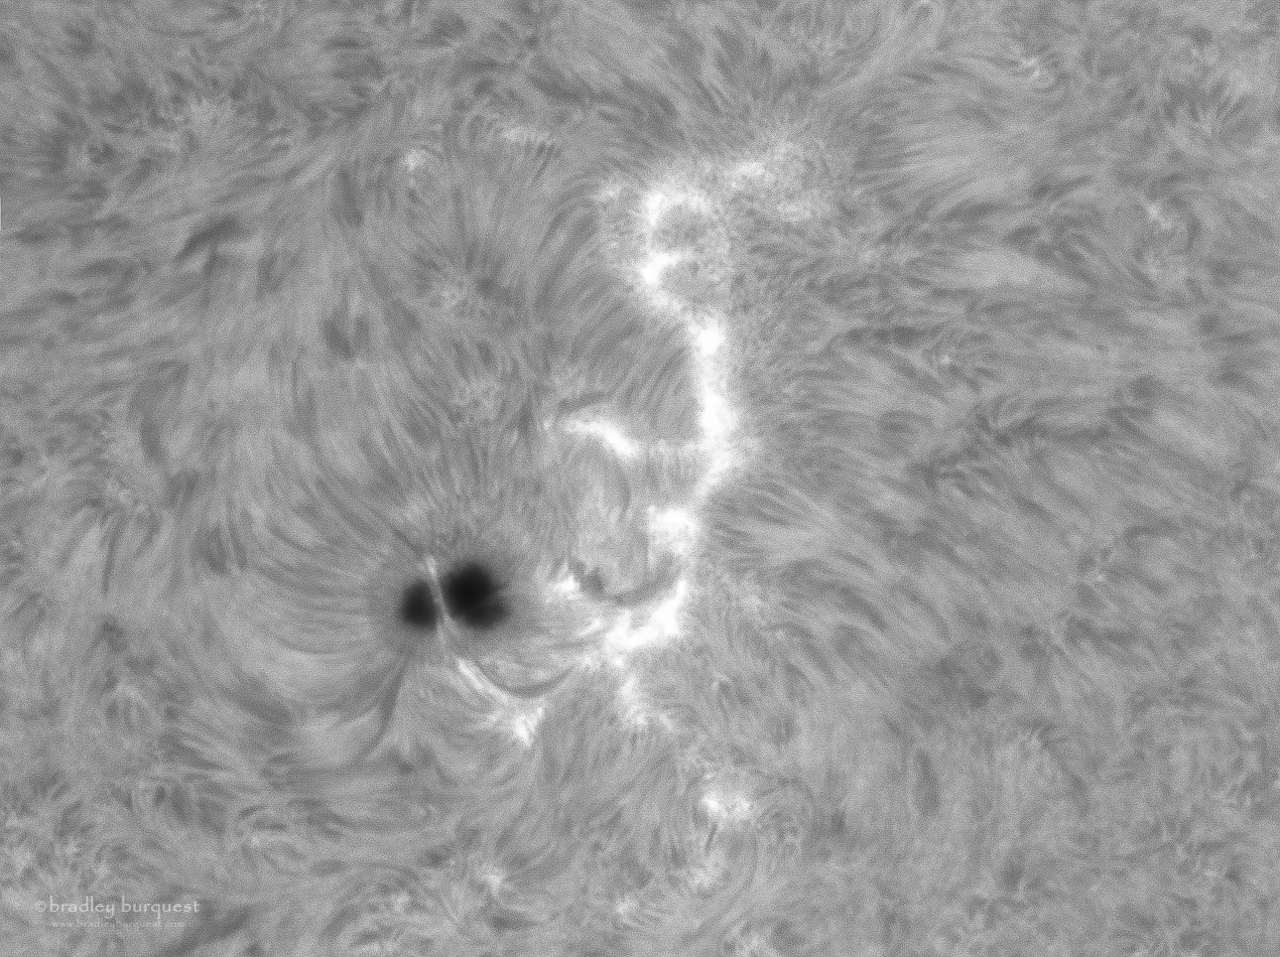 Sunspot and Prominence in H-Alpha Light